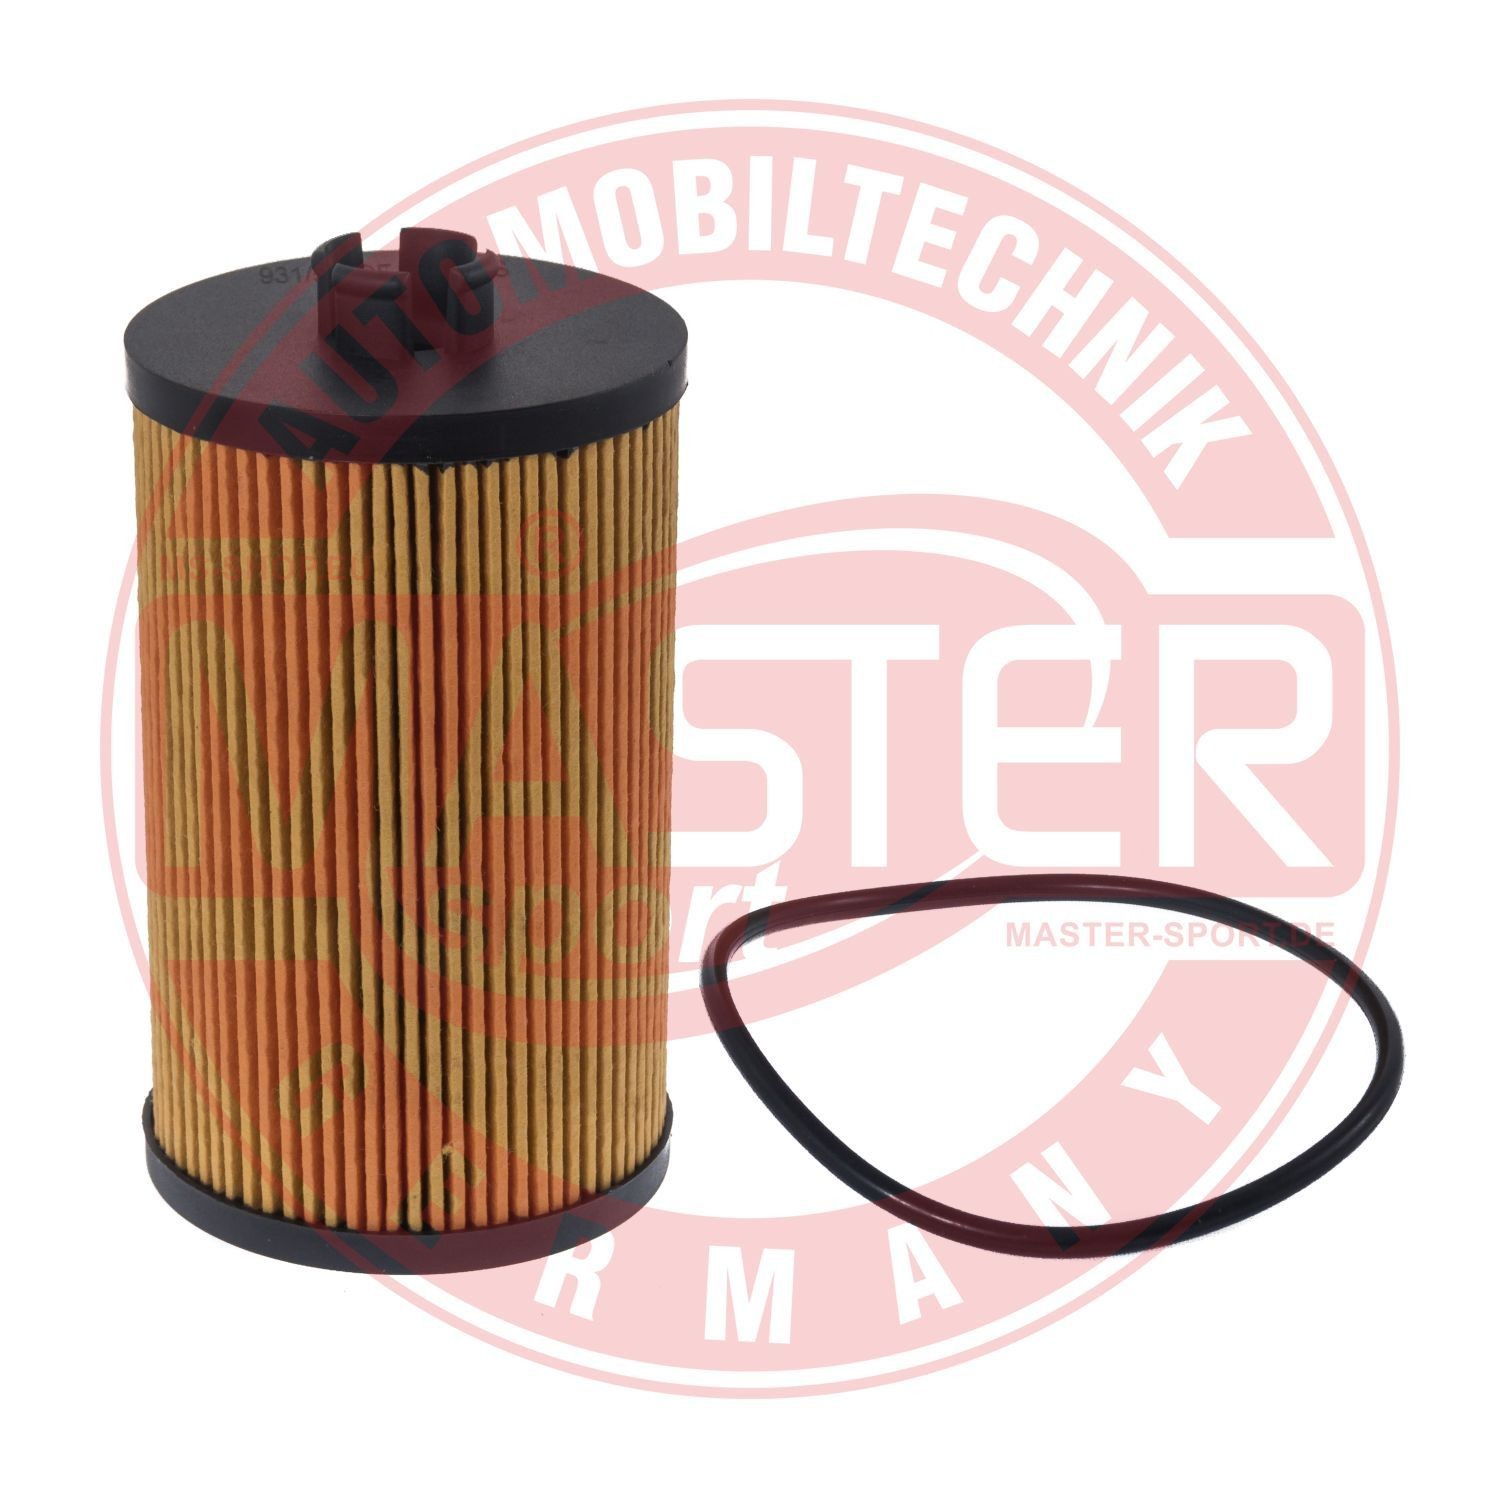 MASTER-SPORT 931/5X-OF-PCS-MS Oil filter with gaskets/seals, Filter Insert